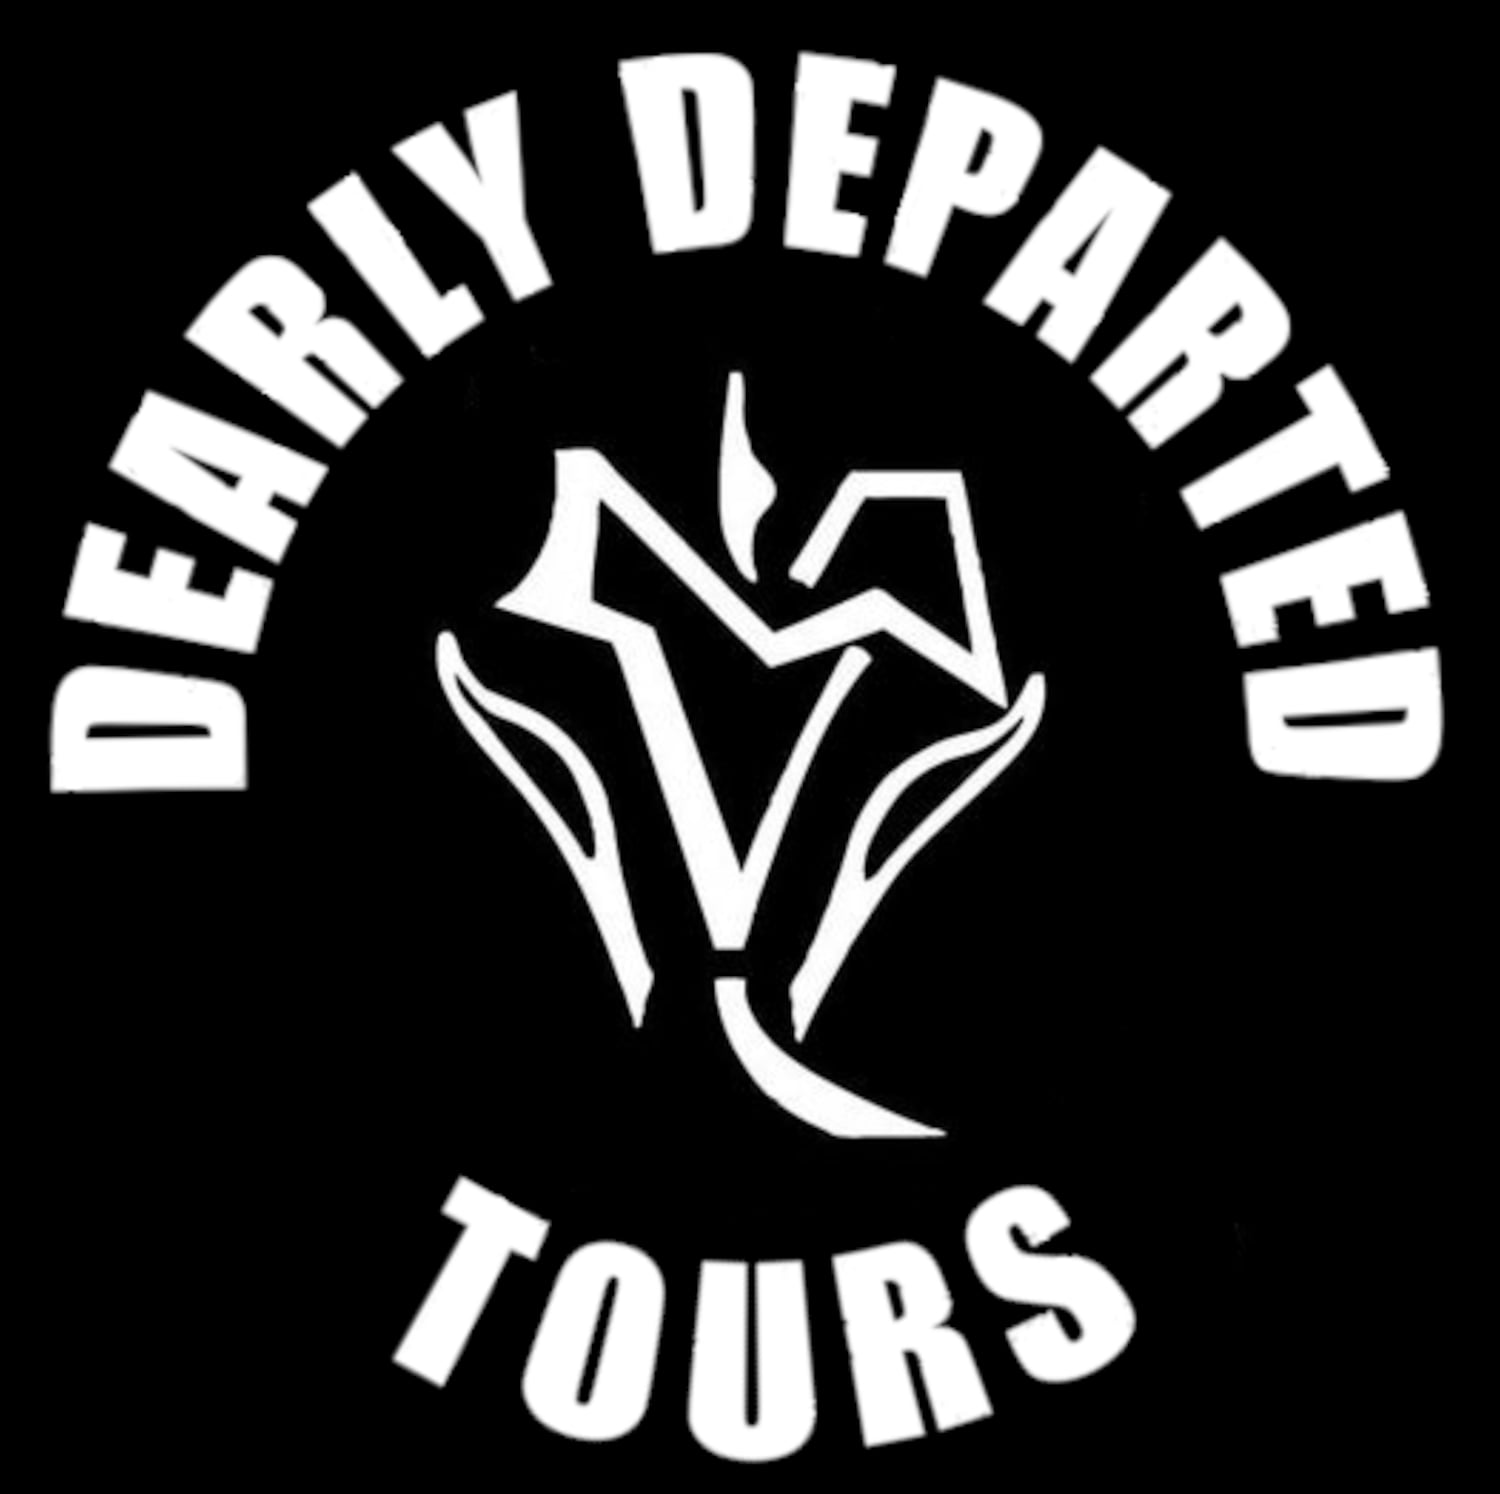 dearly departed tours & artifact museum tours